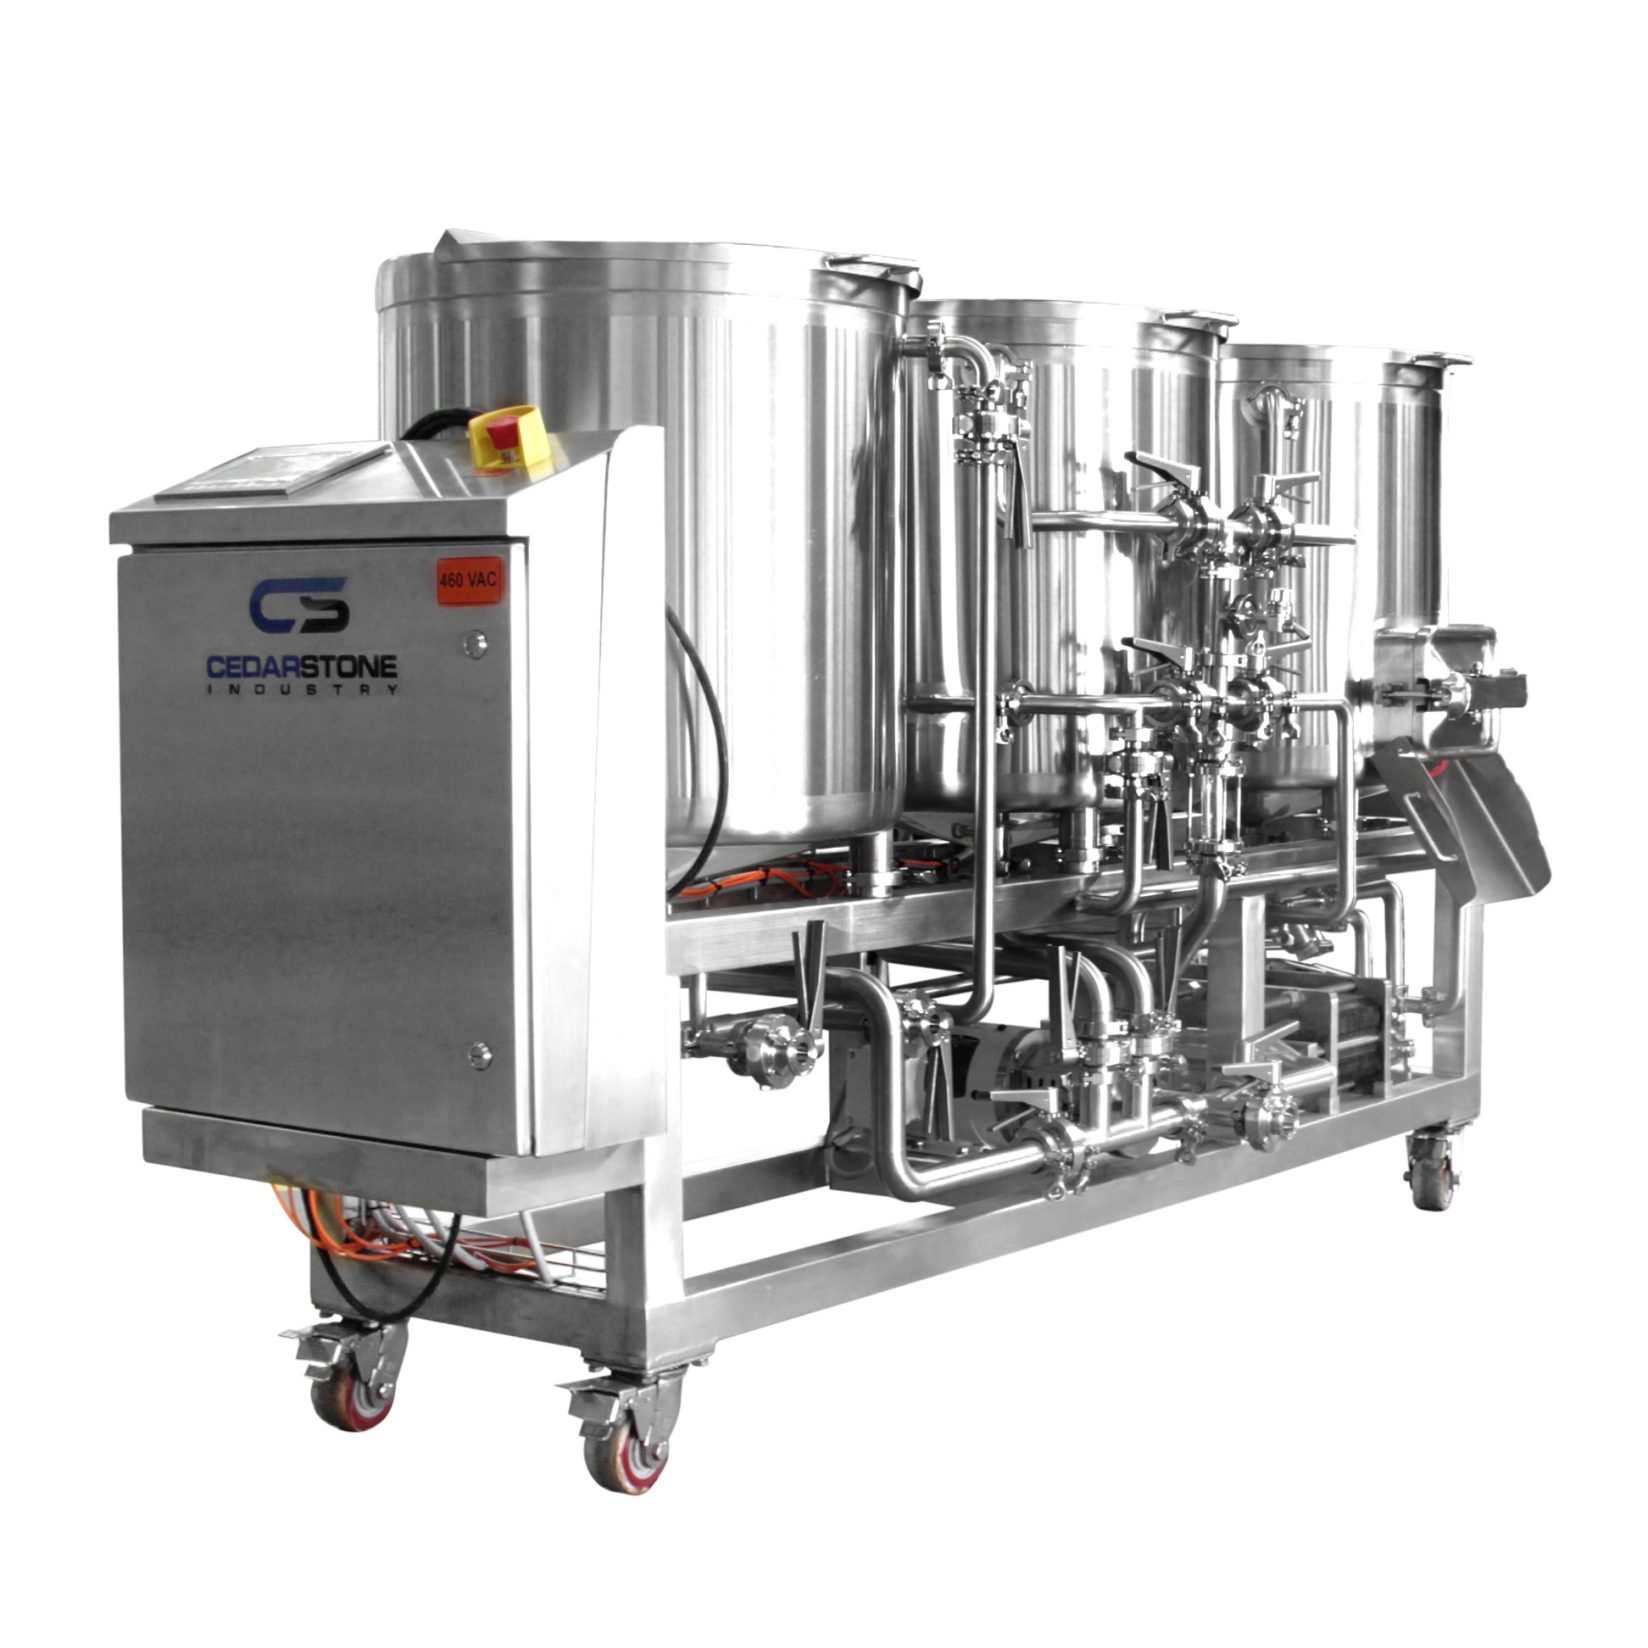 Buy a 3 BBL Brew Kettle, Quality Commercial Brewing Equipment